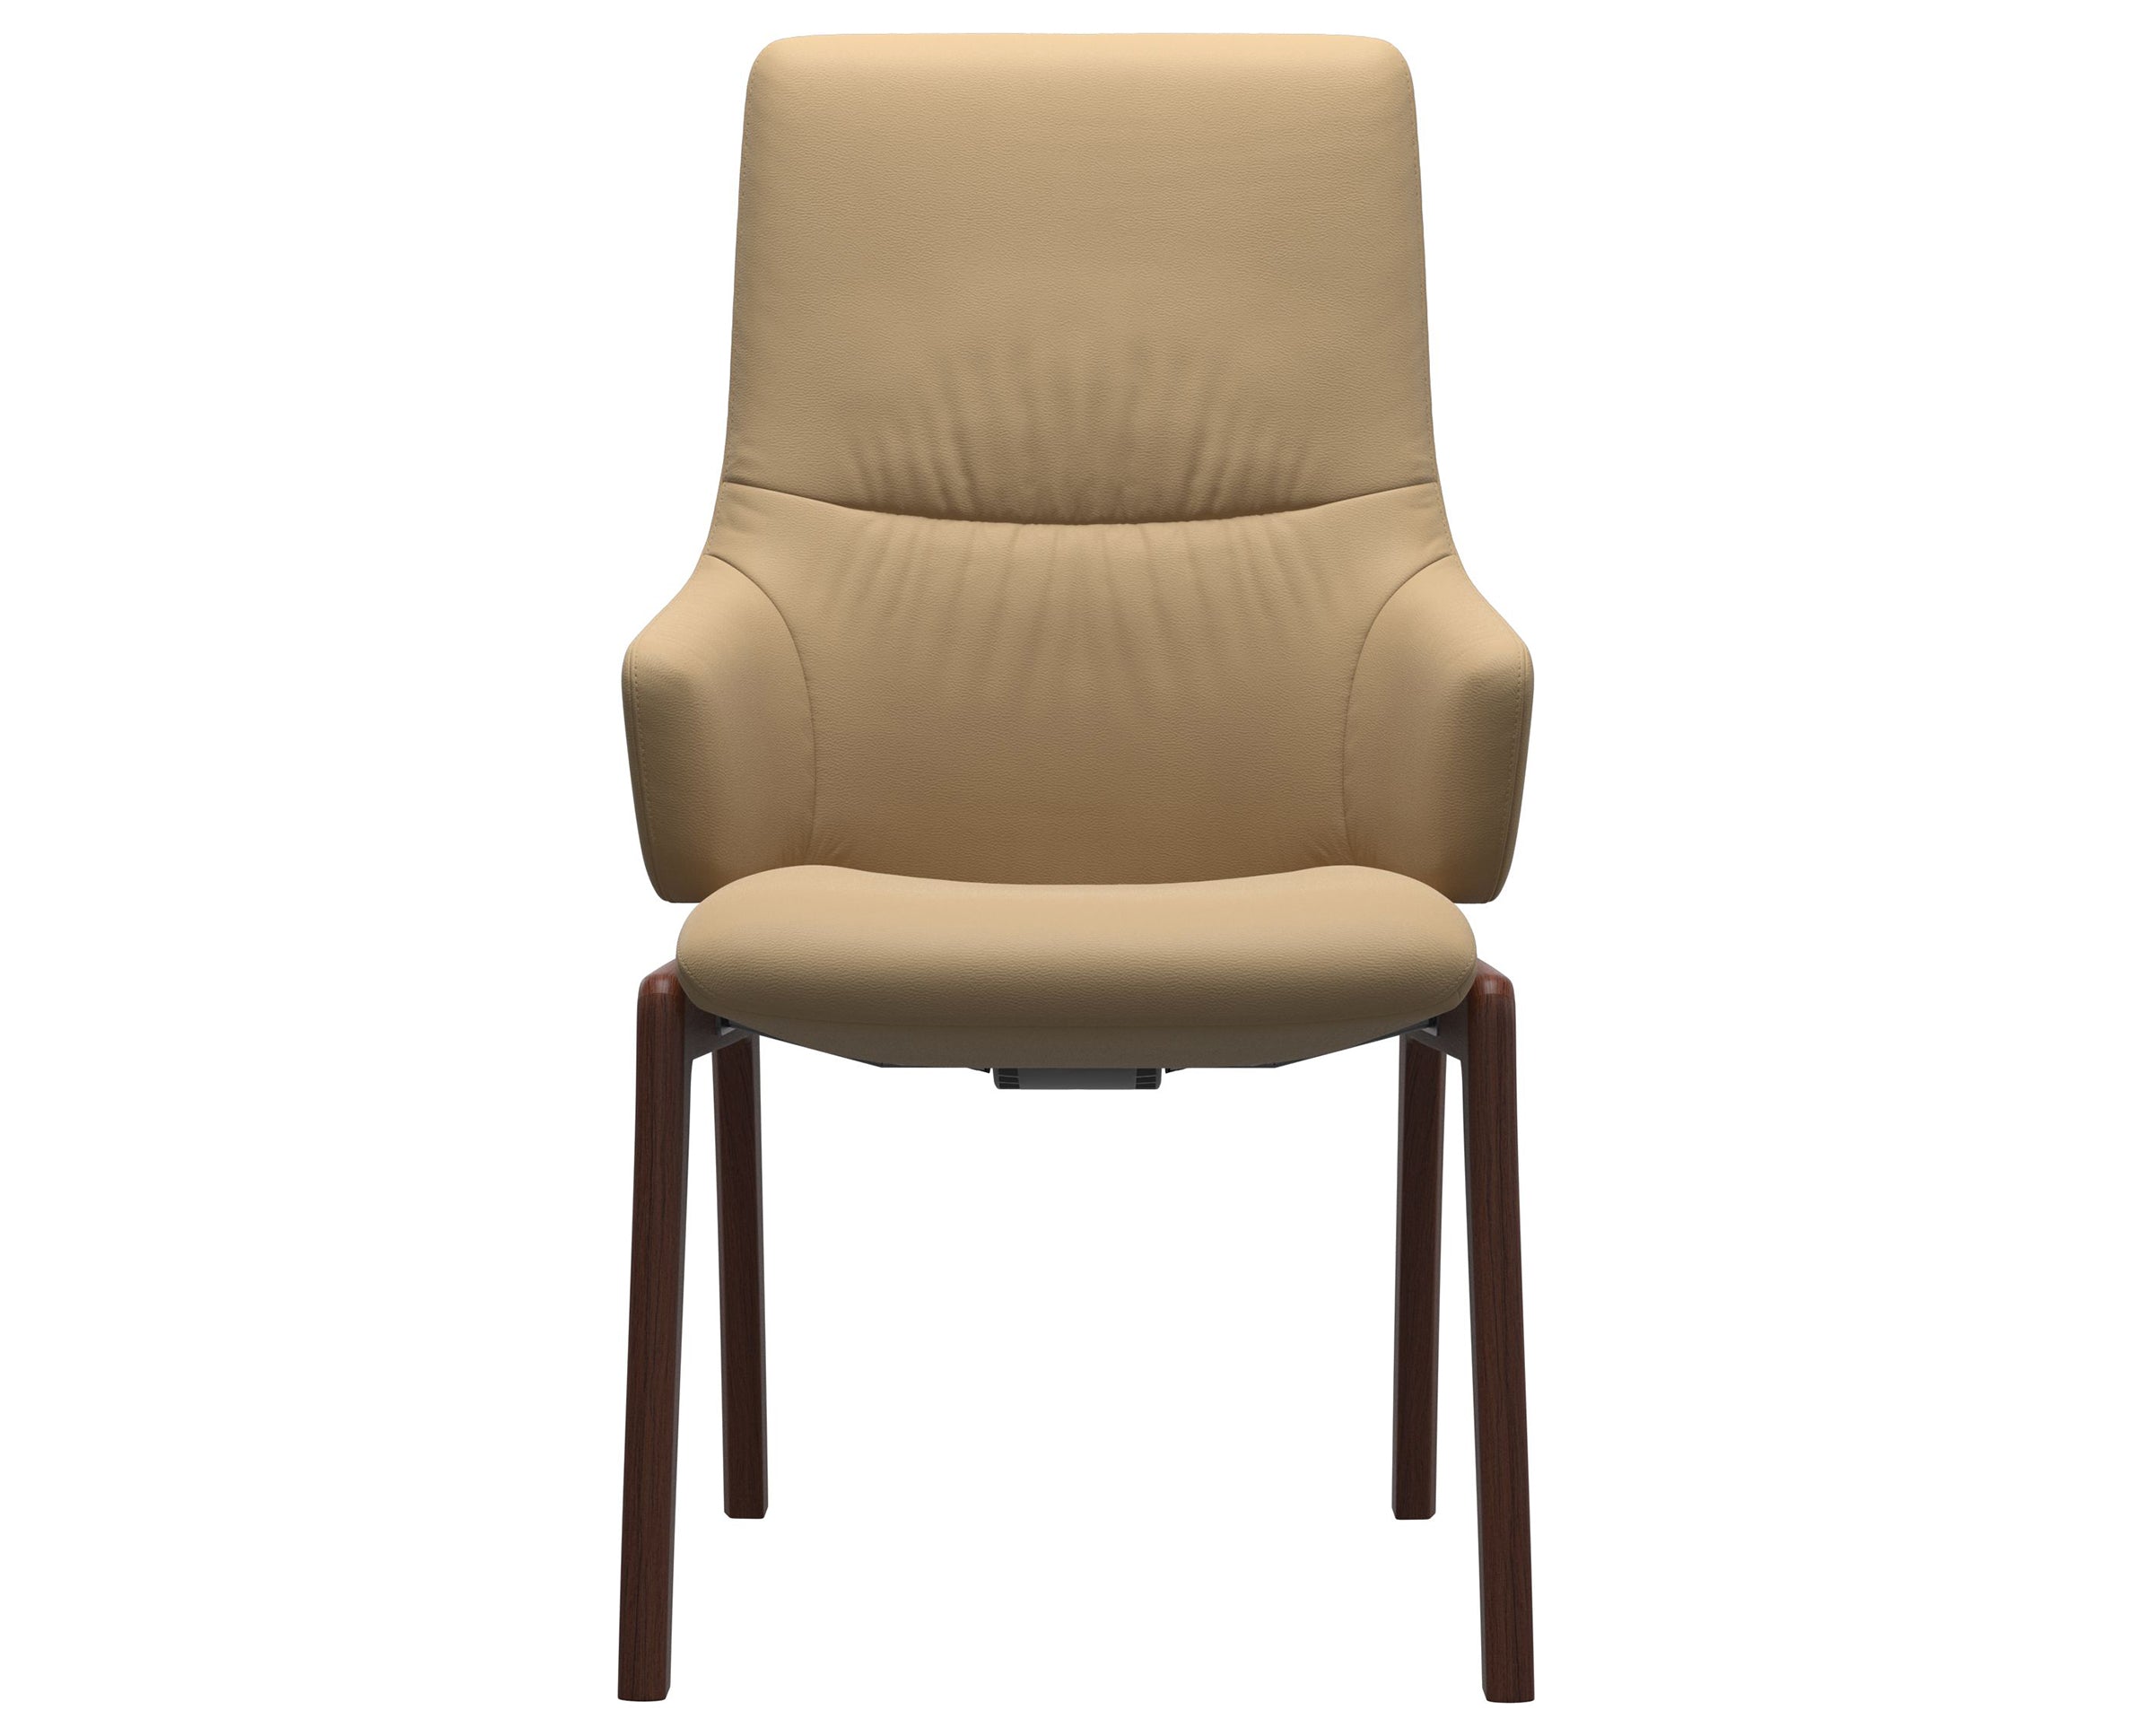 Paloma Leather Sand and Walnut Base | Stressless Mint High Back D100 Dining Chair w/Arms | Valley Ridge Furniture